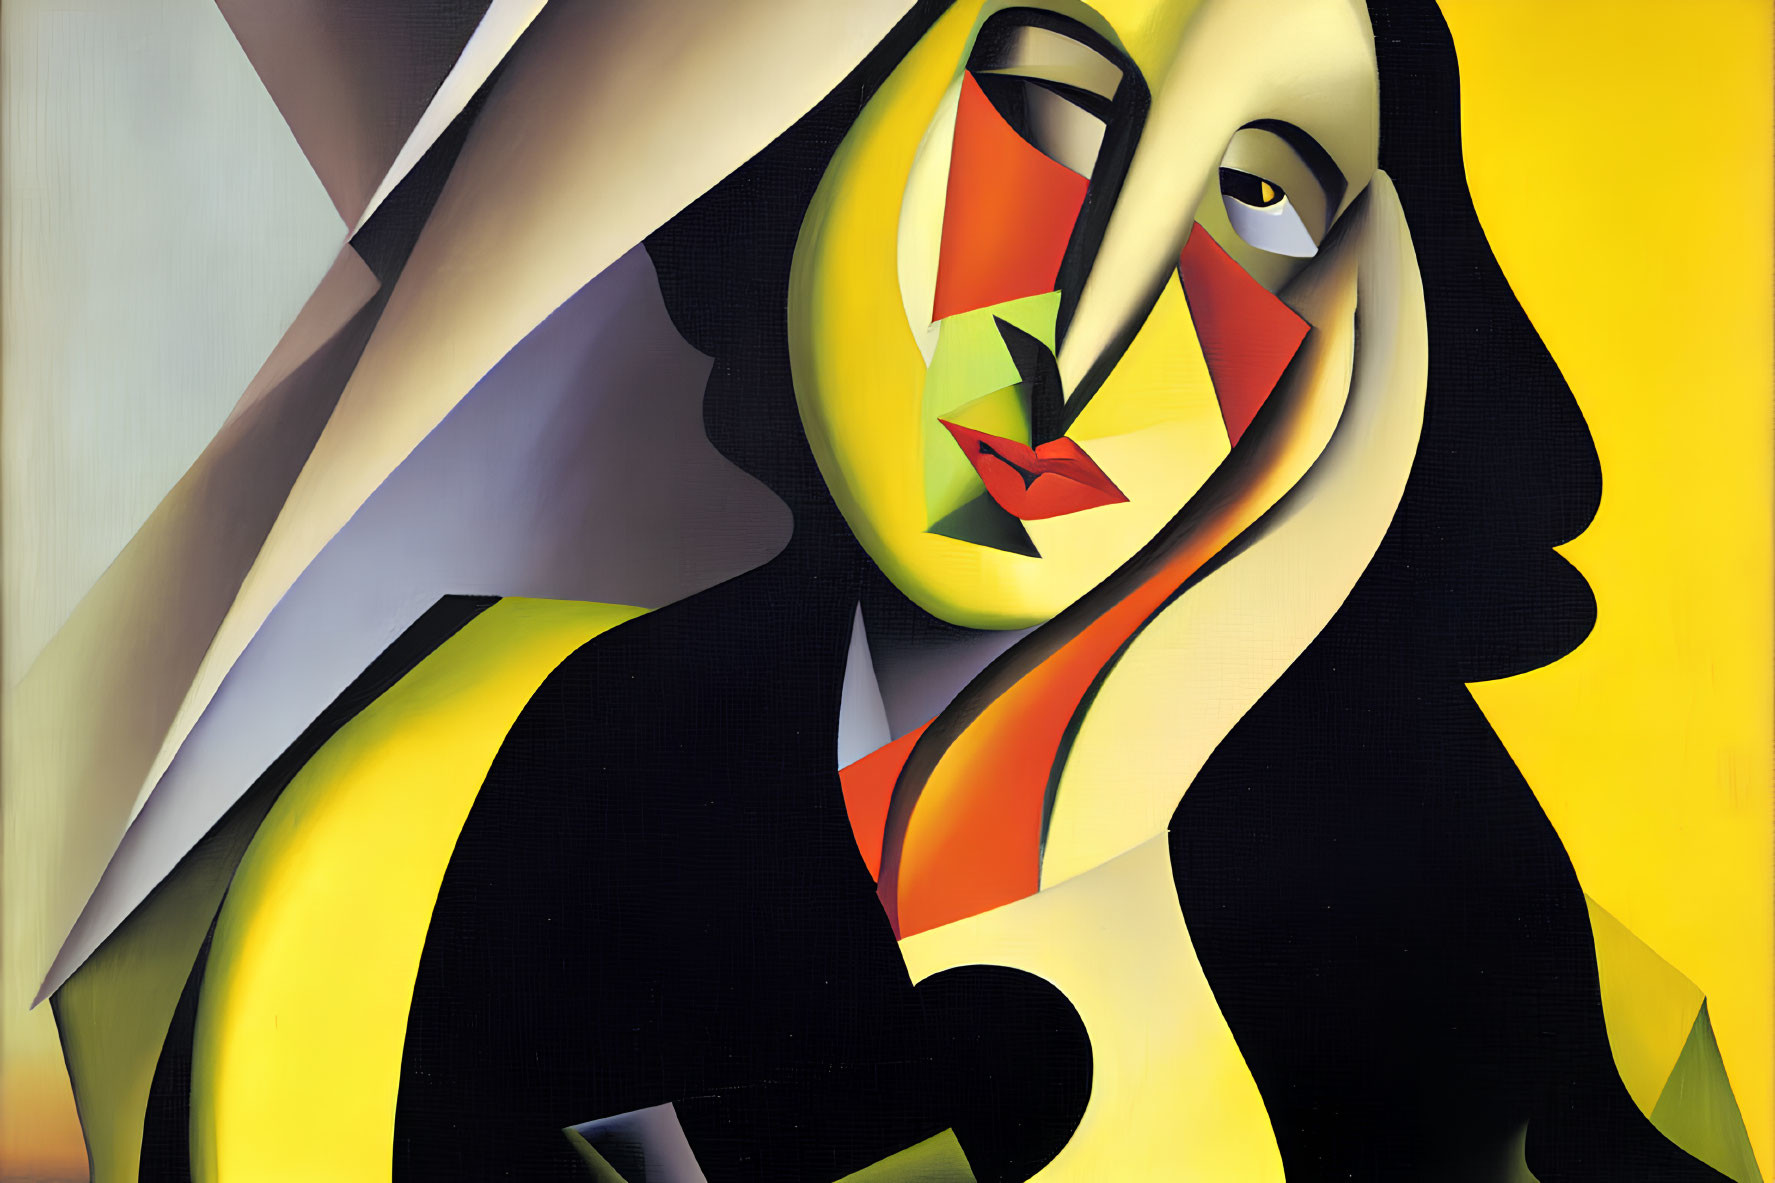 Cubist-style Abstract Painting of Woman with Geometric Shapes